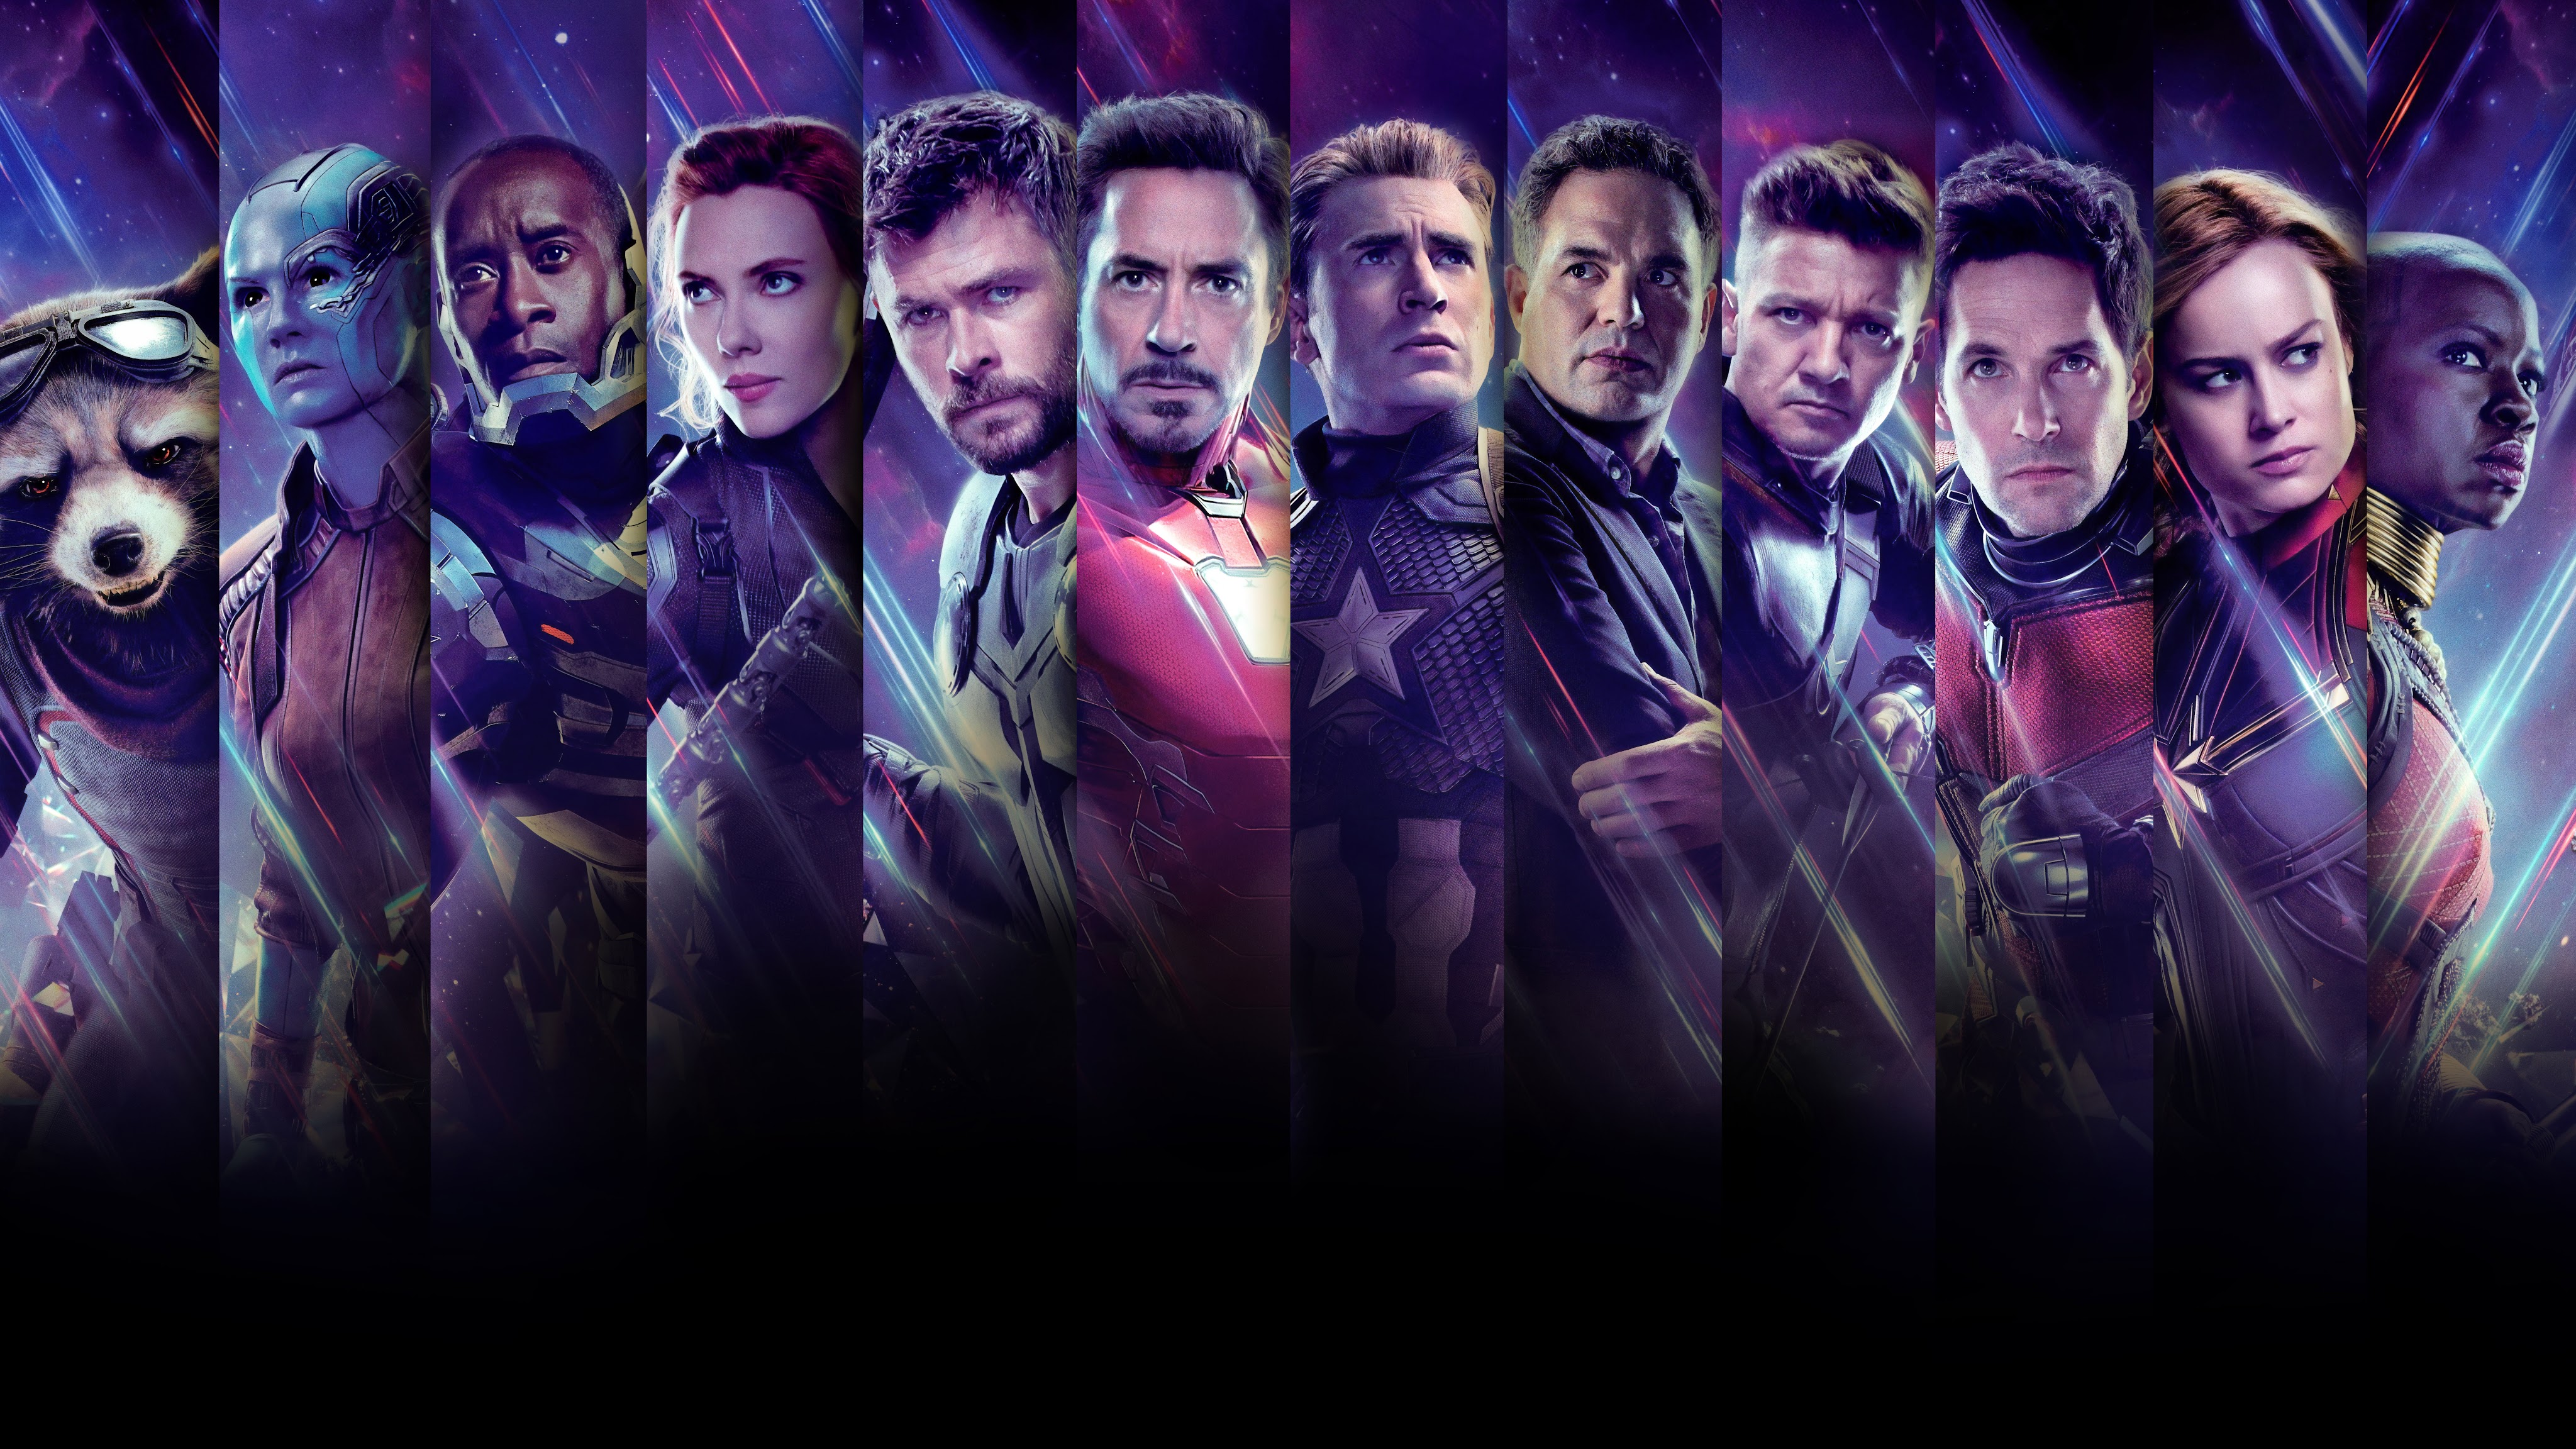 The Endgame: Who is in the cast?